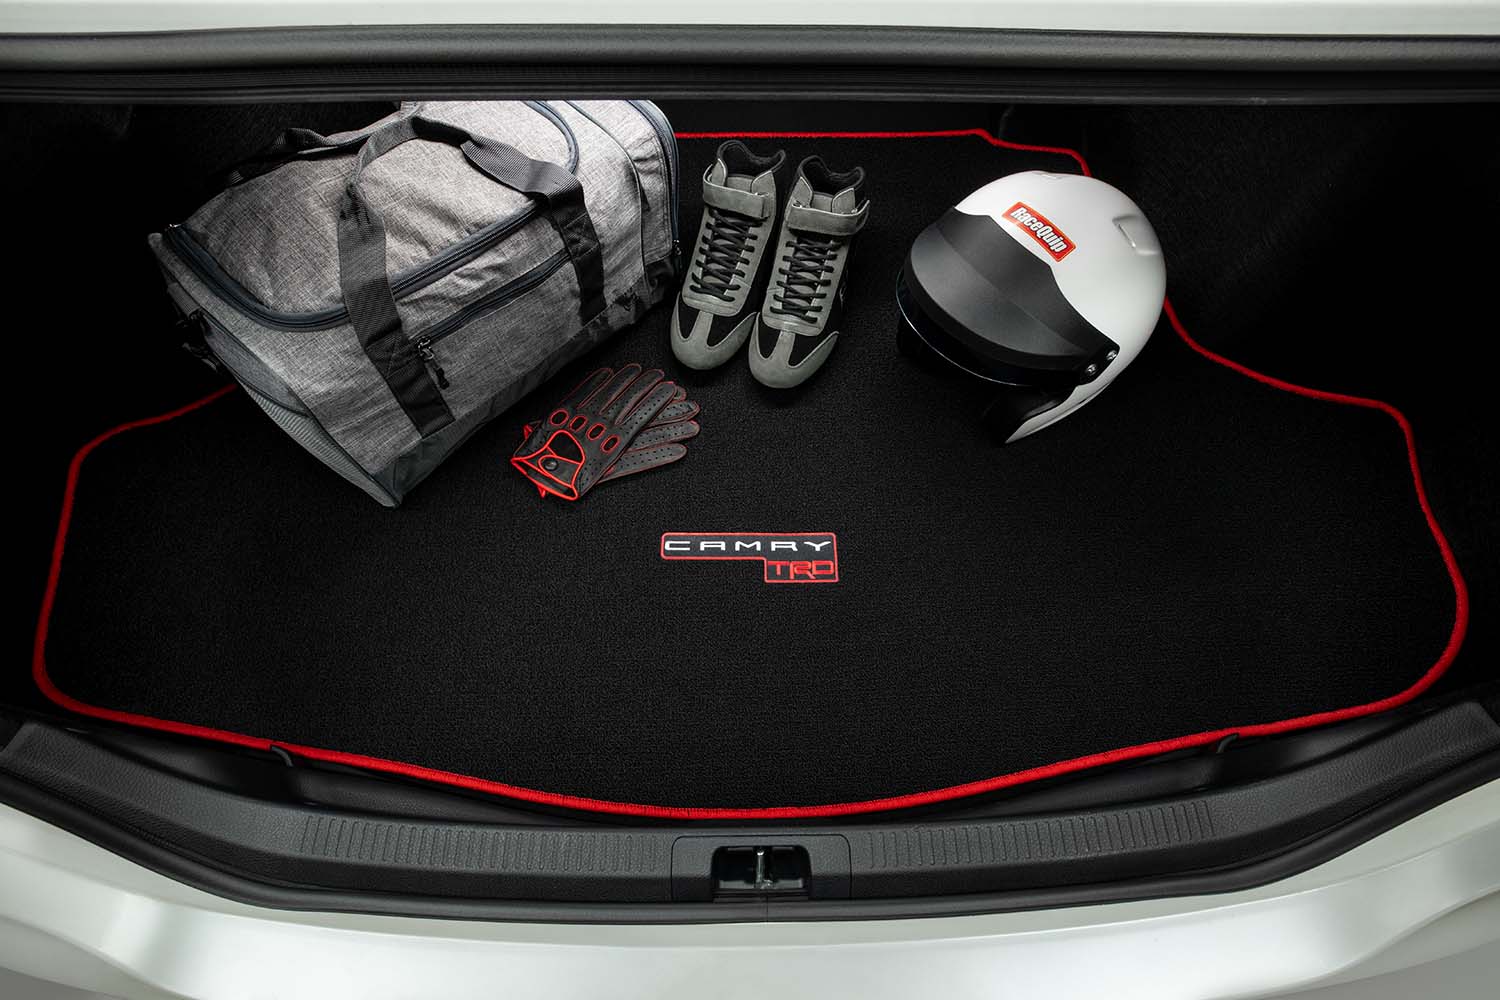 Accessories that help keep your Toyota protected at Bennett Toyota in Allentown, PA | Toyota Camry trunk mat